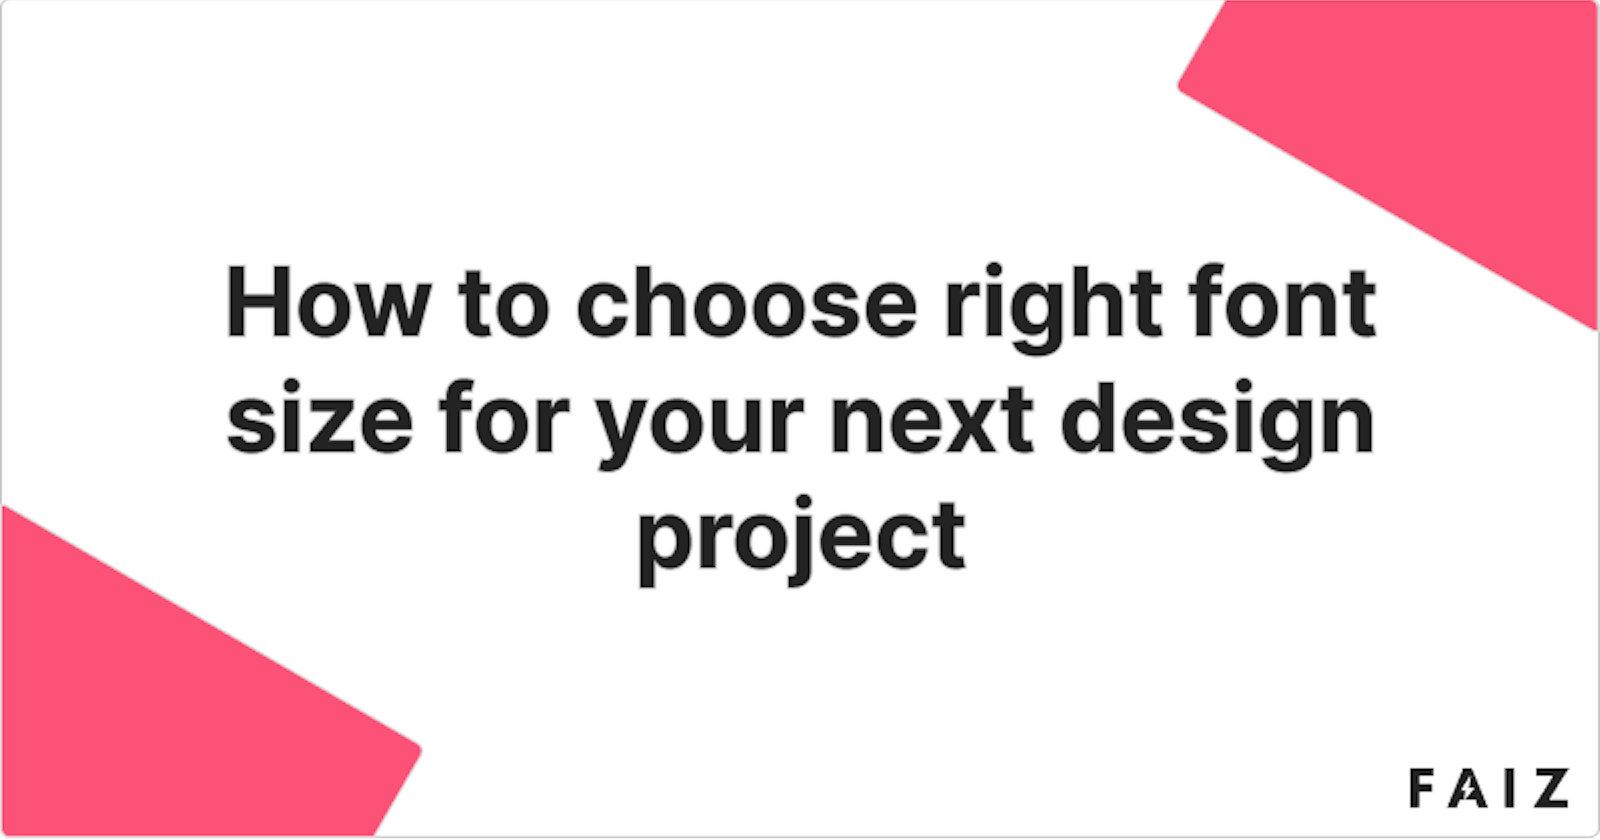 How to choose right font size for your next design project